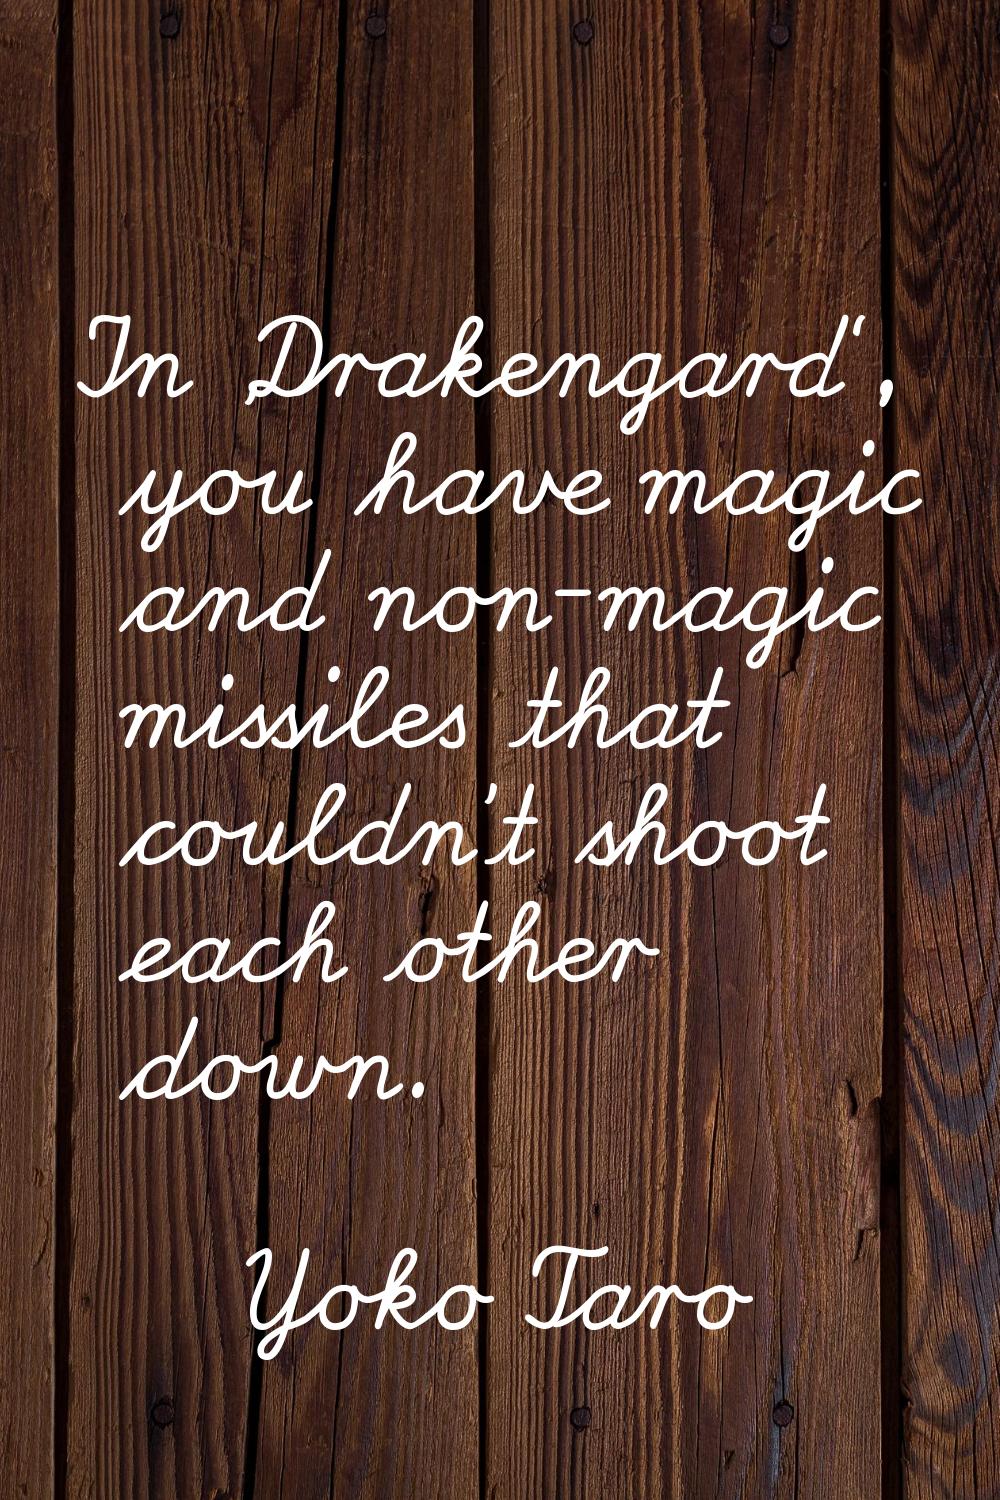 In 'Drakengard', you have magic and non-magic missiles that couldn't shoot each other down.